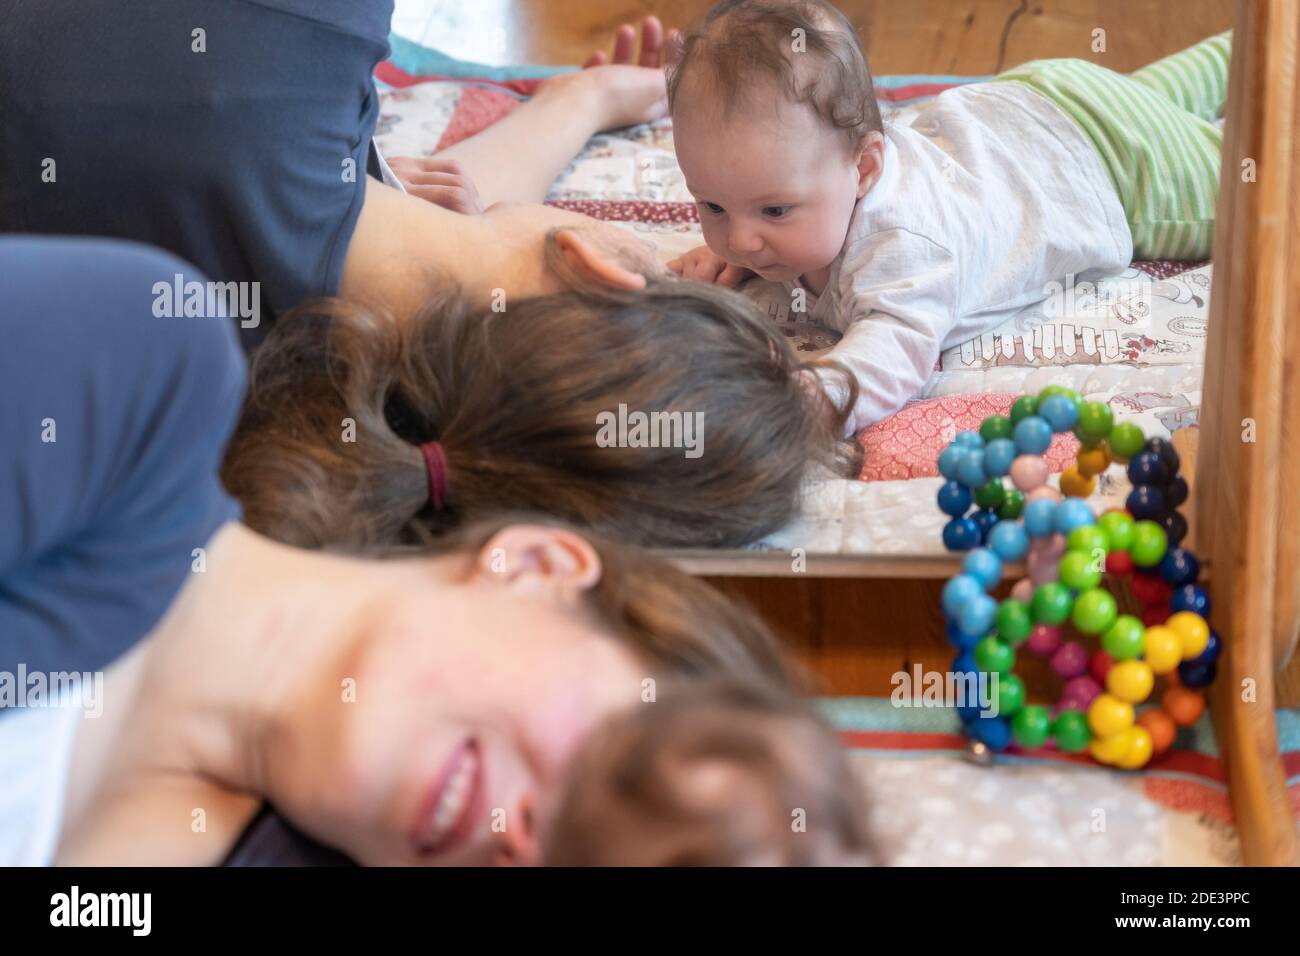 A mother interacting and playing with her 4 month old baby daughter, with both lying down on a play mat with a mirror behind, UK Stock Photo